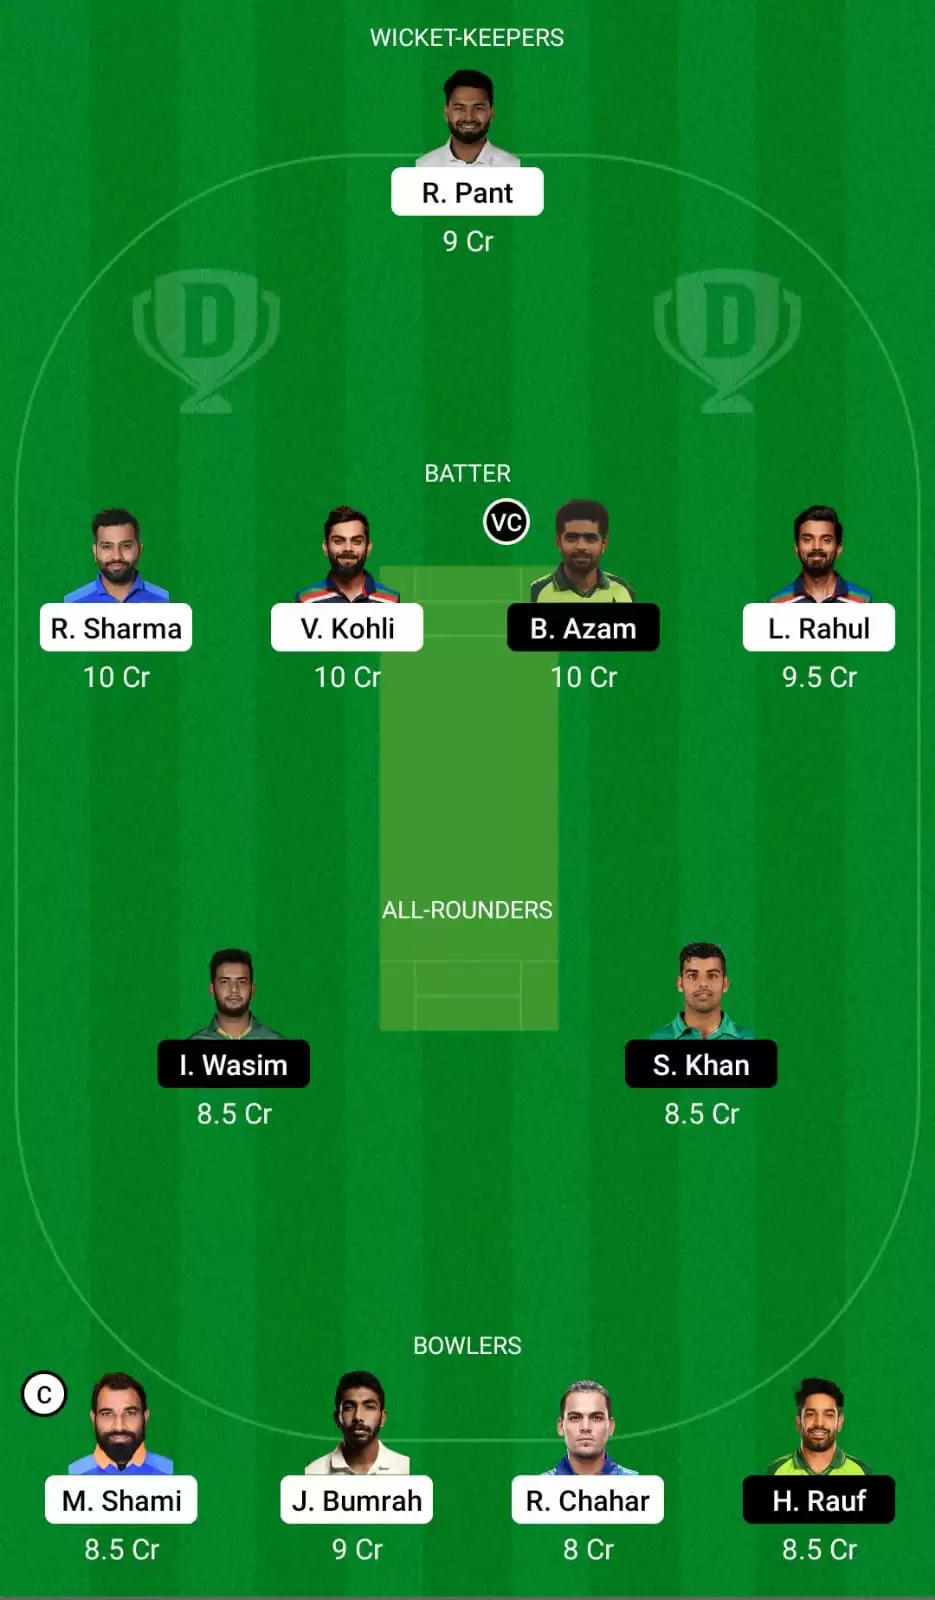 IND vs PAK Dream11 Prediction For ICC T20 World Cup 2021: Playing XI, Fantasy Cricket Tips, Team, Weather Updates and Pitch Report